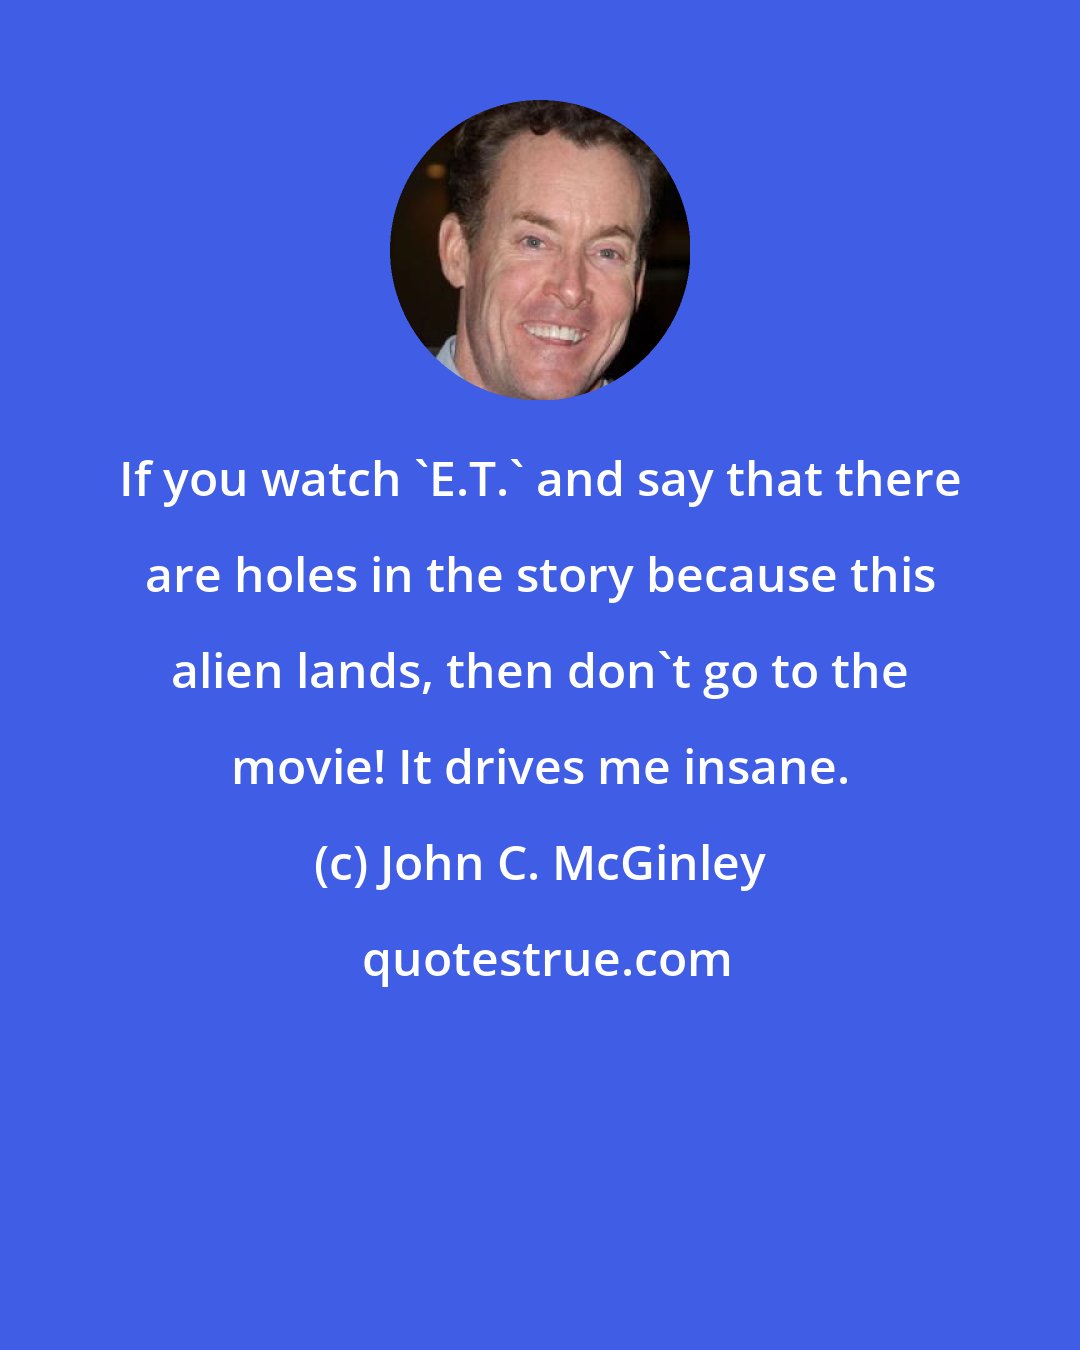 John C. McGinley: If you watch 'E.T.' and say that there are holes in the story because this alien lands, then don't go to the movie! It drives me insane.